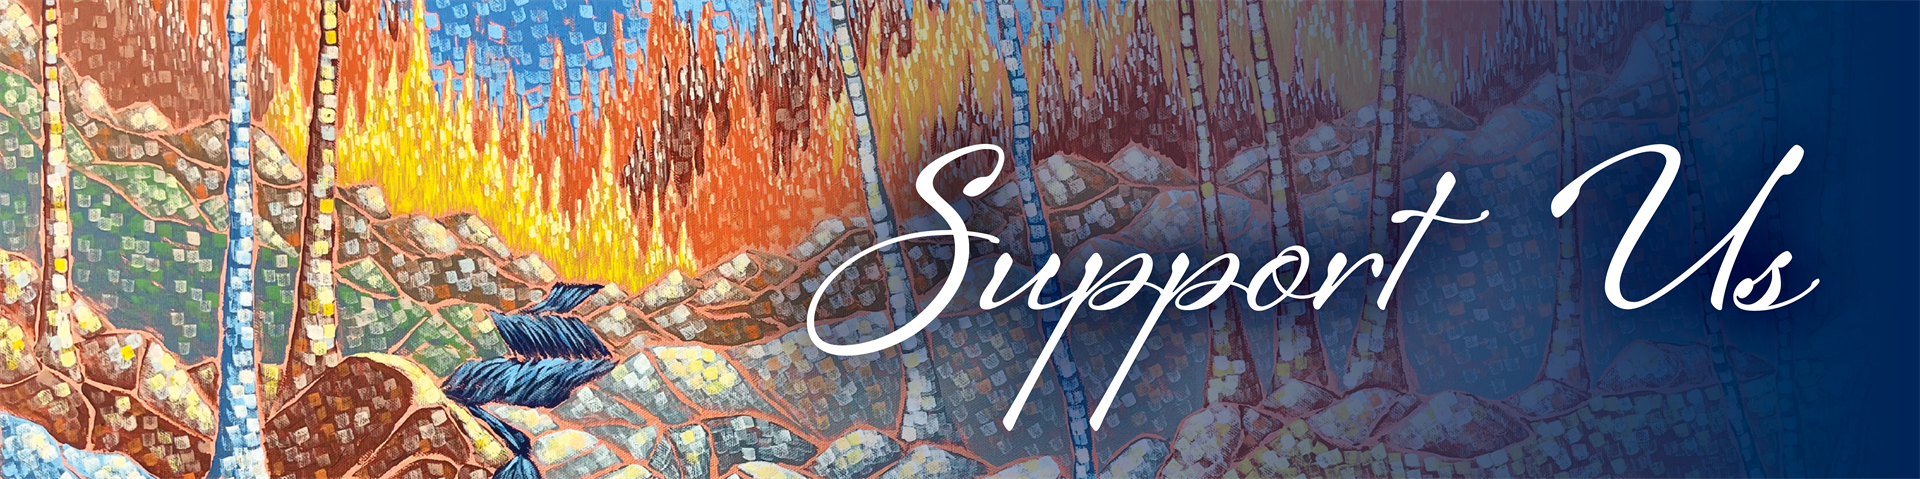 "Support Us" banner. Image: Aaron Kloss, "I remember the day Autumn arrived"